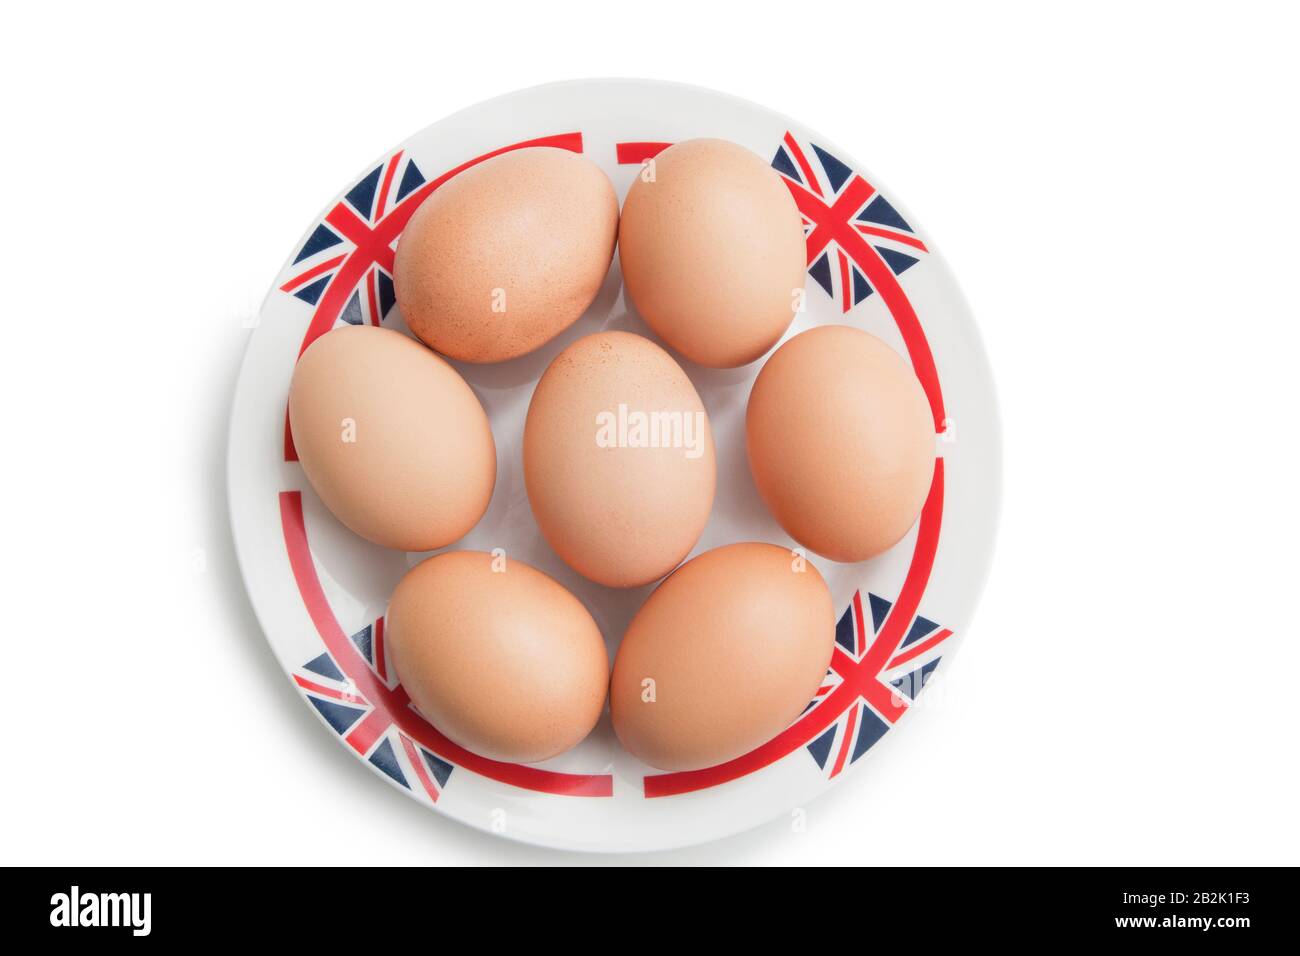 Brown eggs in plate over white background Stock Photo